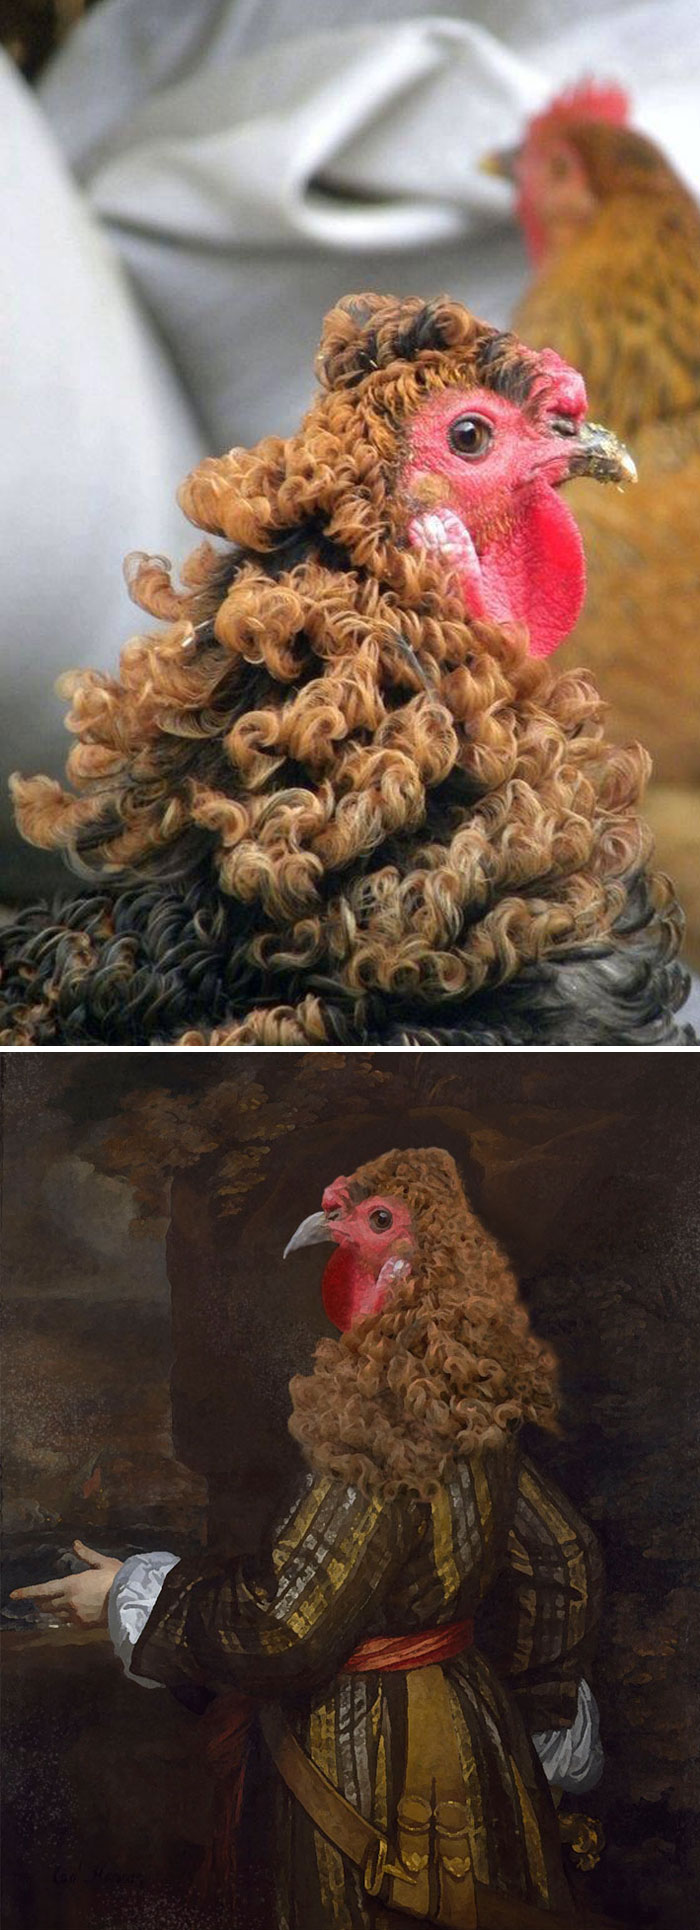 This Chicken With Curly Feathers